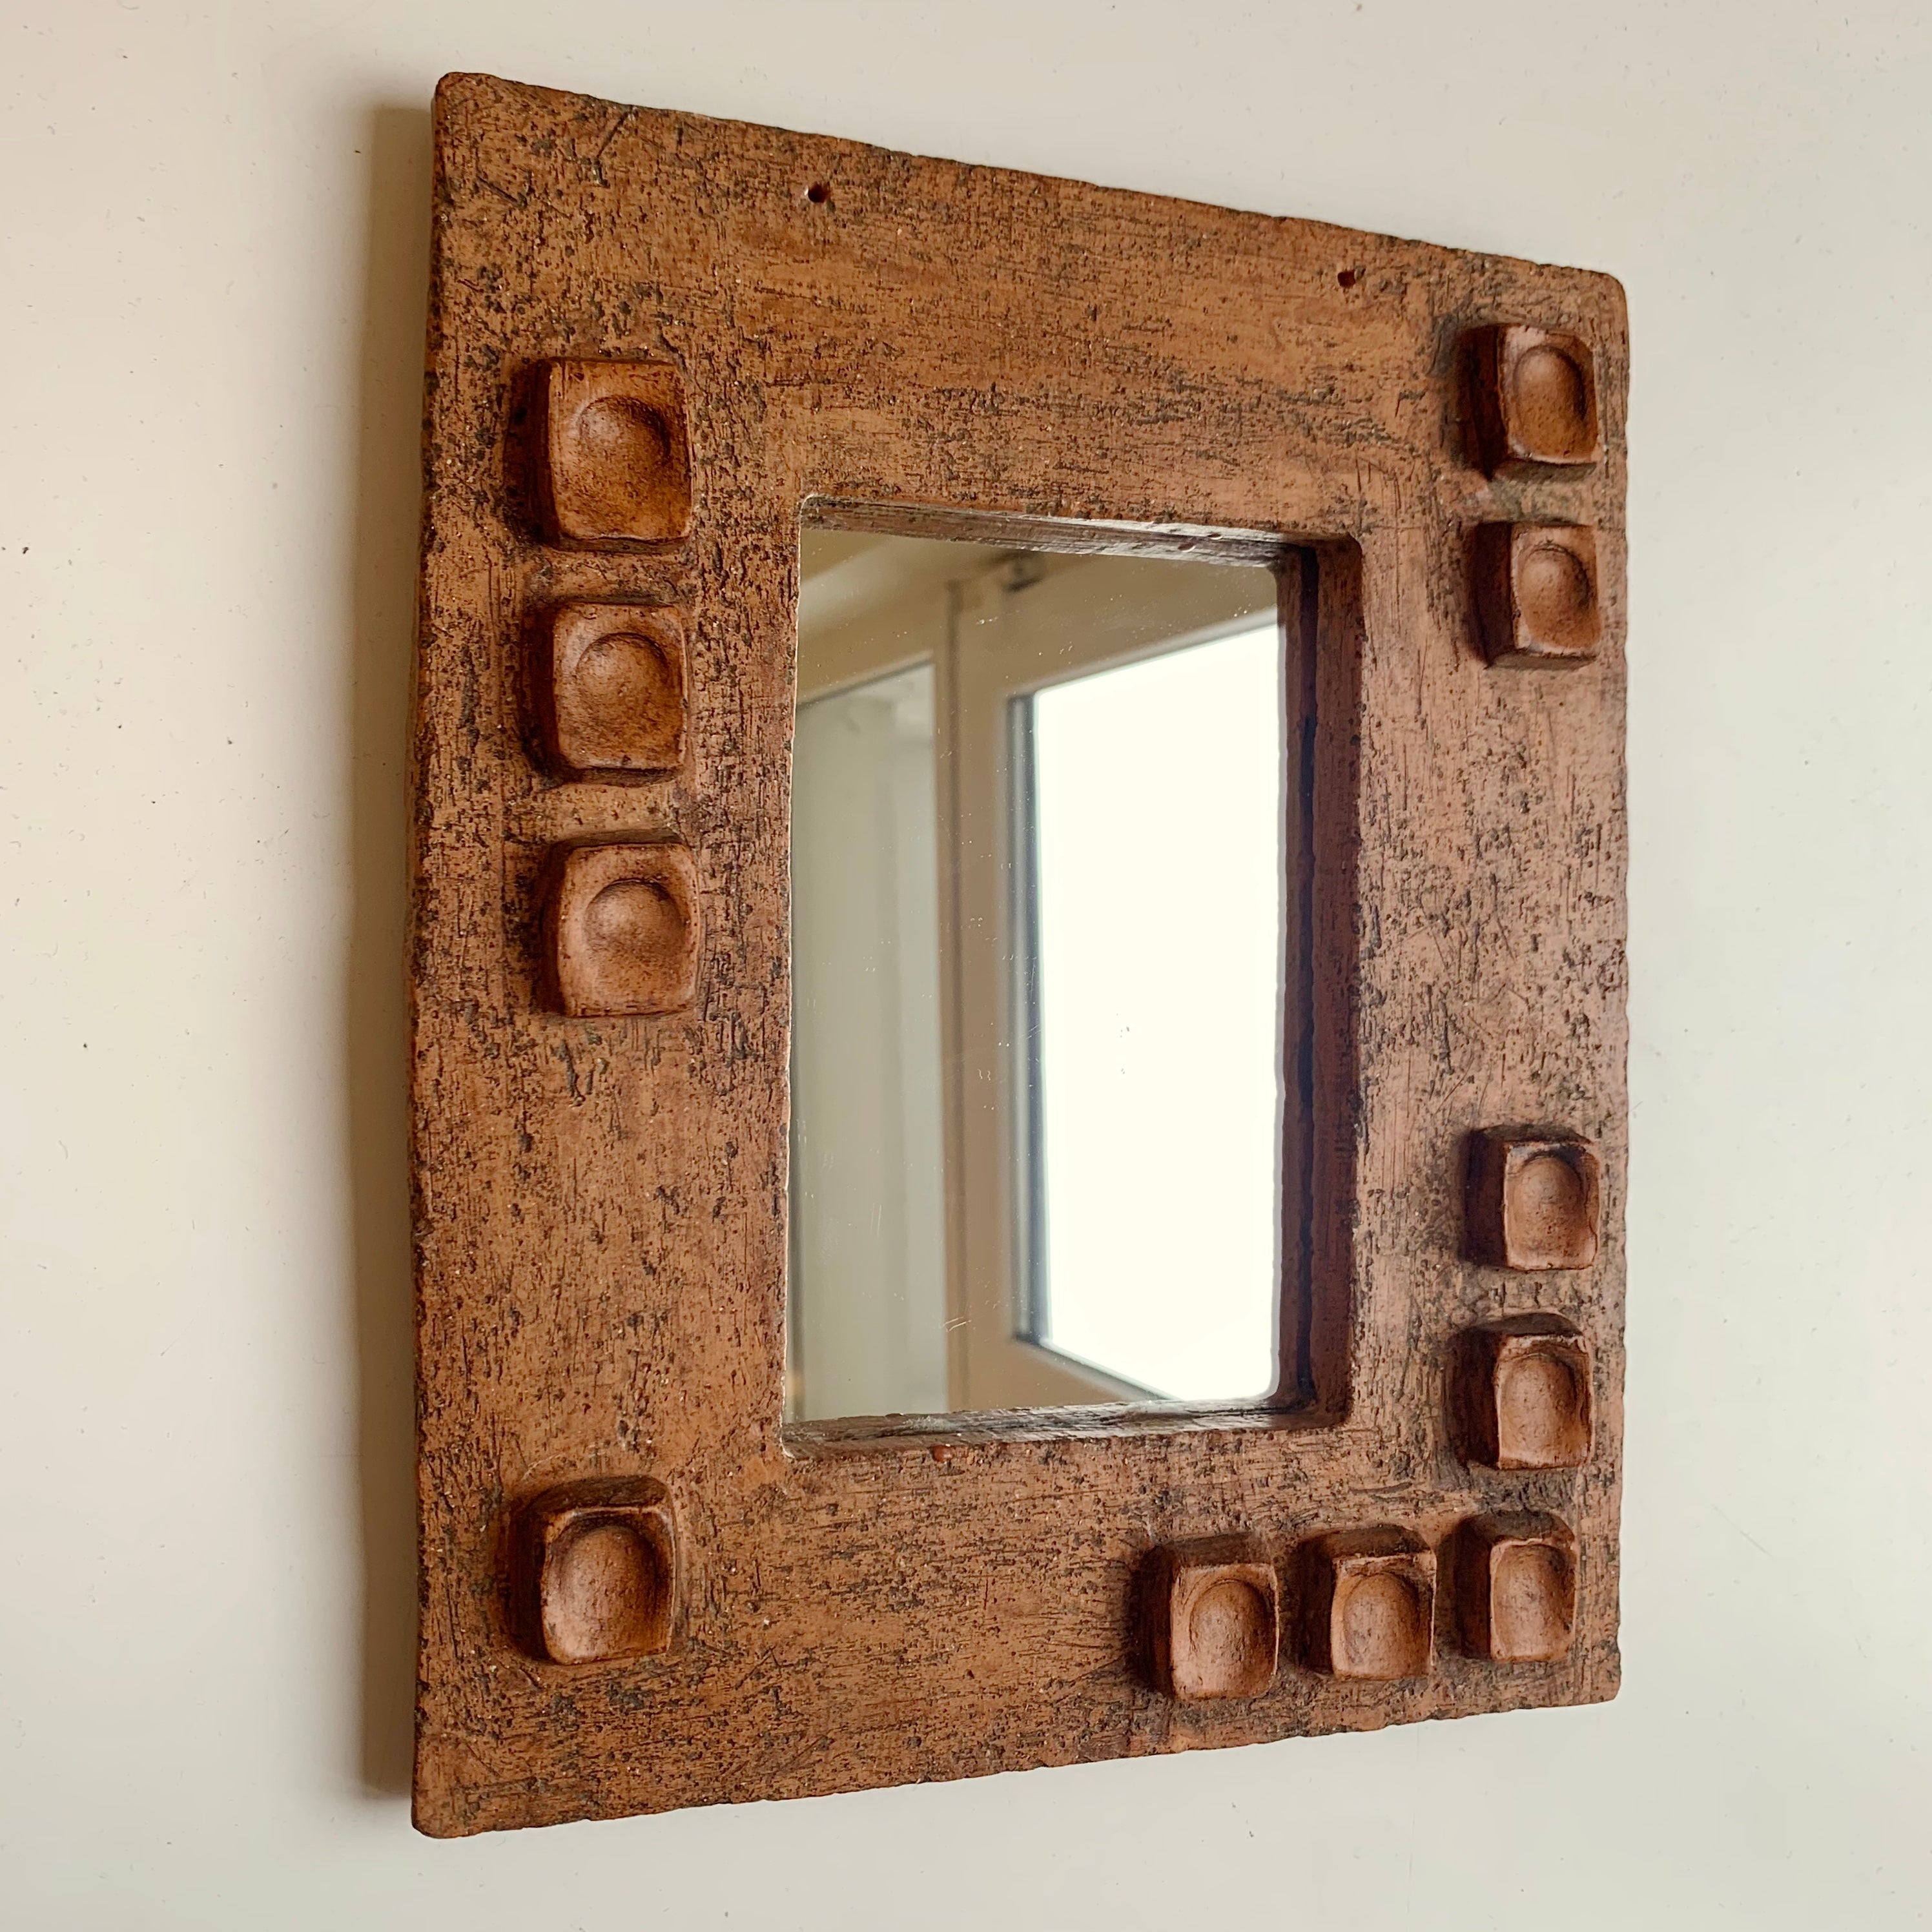 Ceramic Mirror With Abstract Composition circa 1950, France. For Sale